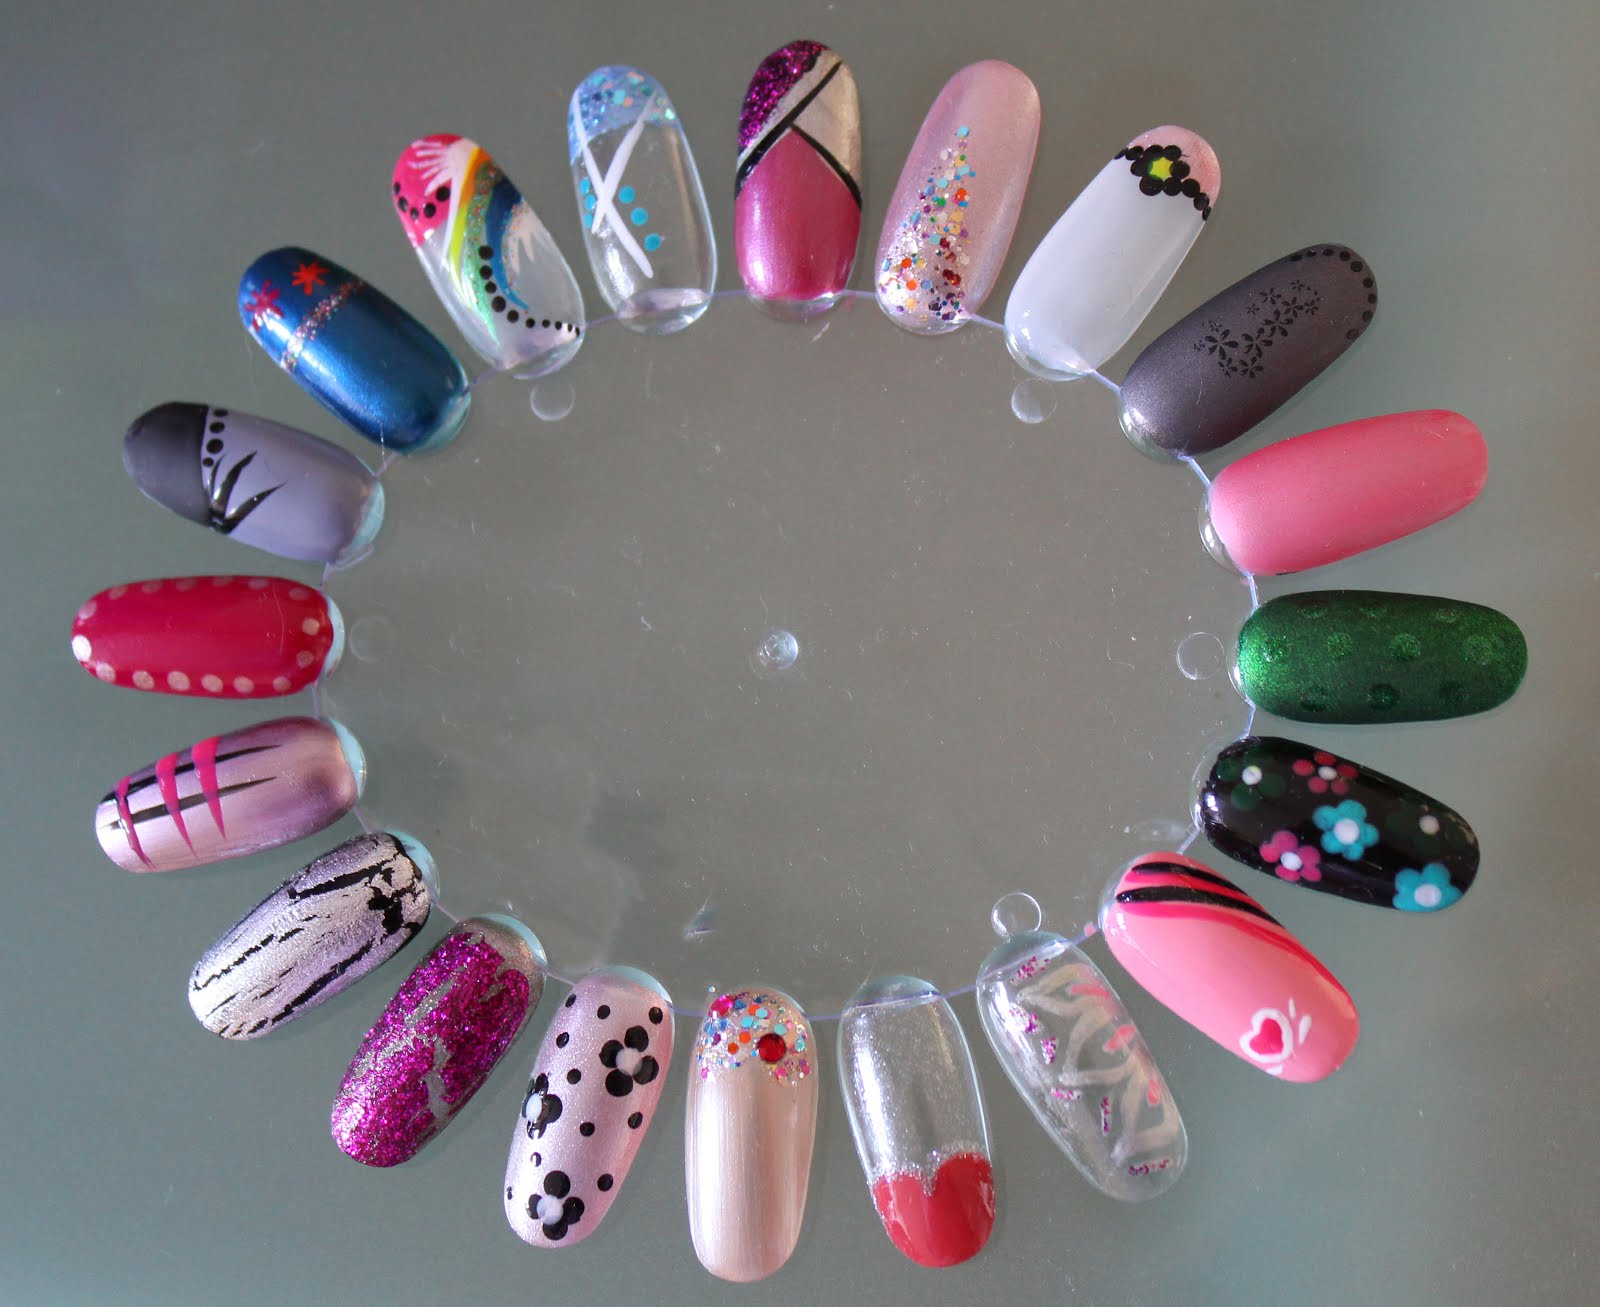 4. Clear Nail Art Display Case - wide 2